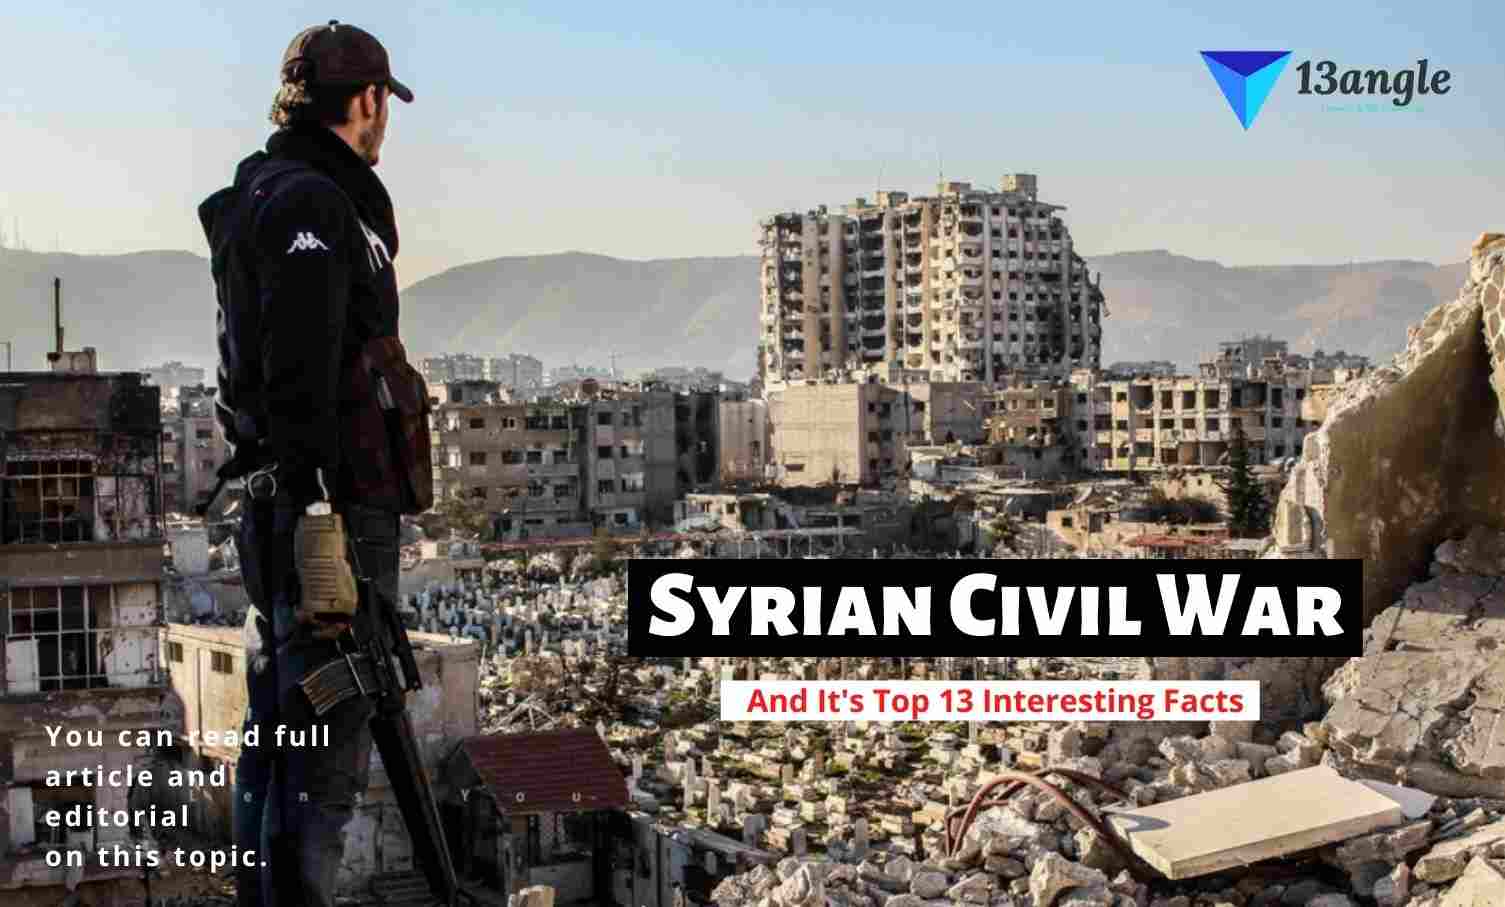 Syrian Civil War And It's Top 13 Interesting Facts- 13angle.com